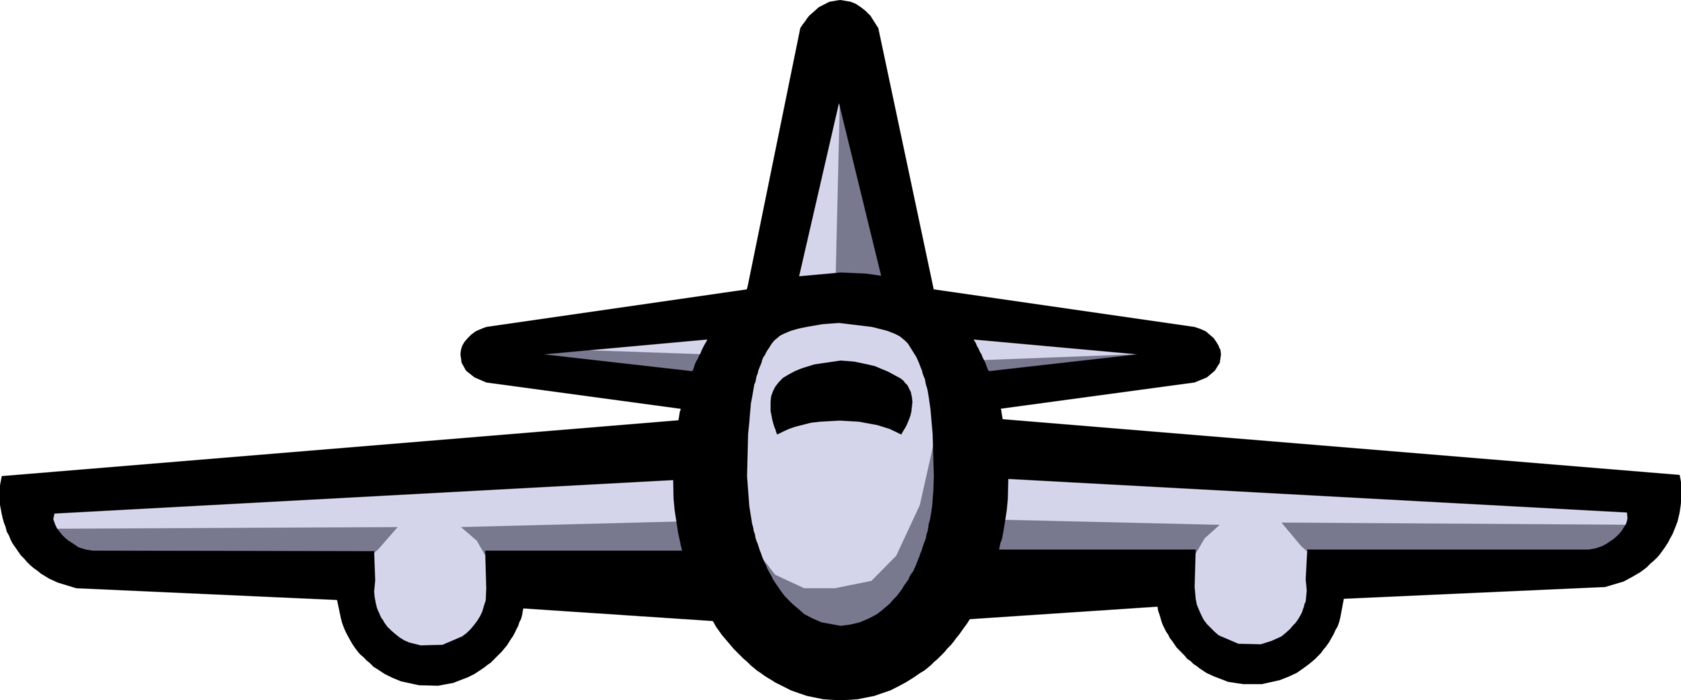 Vector Illustration of Fixed-Wing Jet Airplane Aircraft in Level Flight